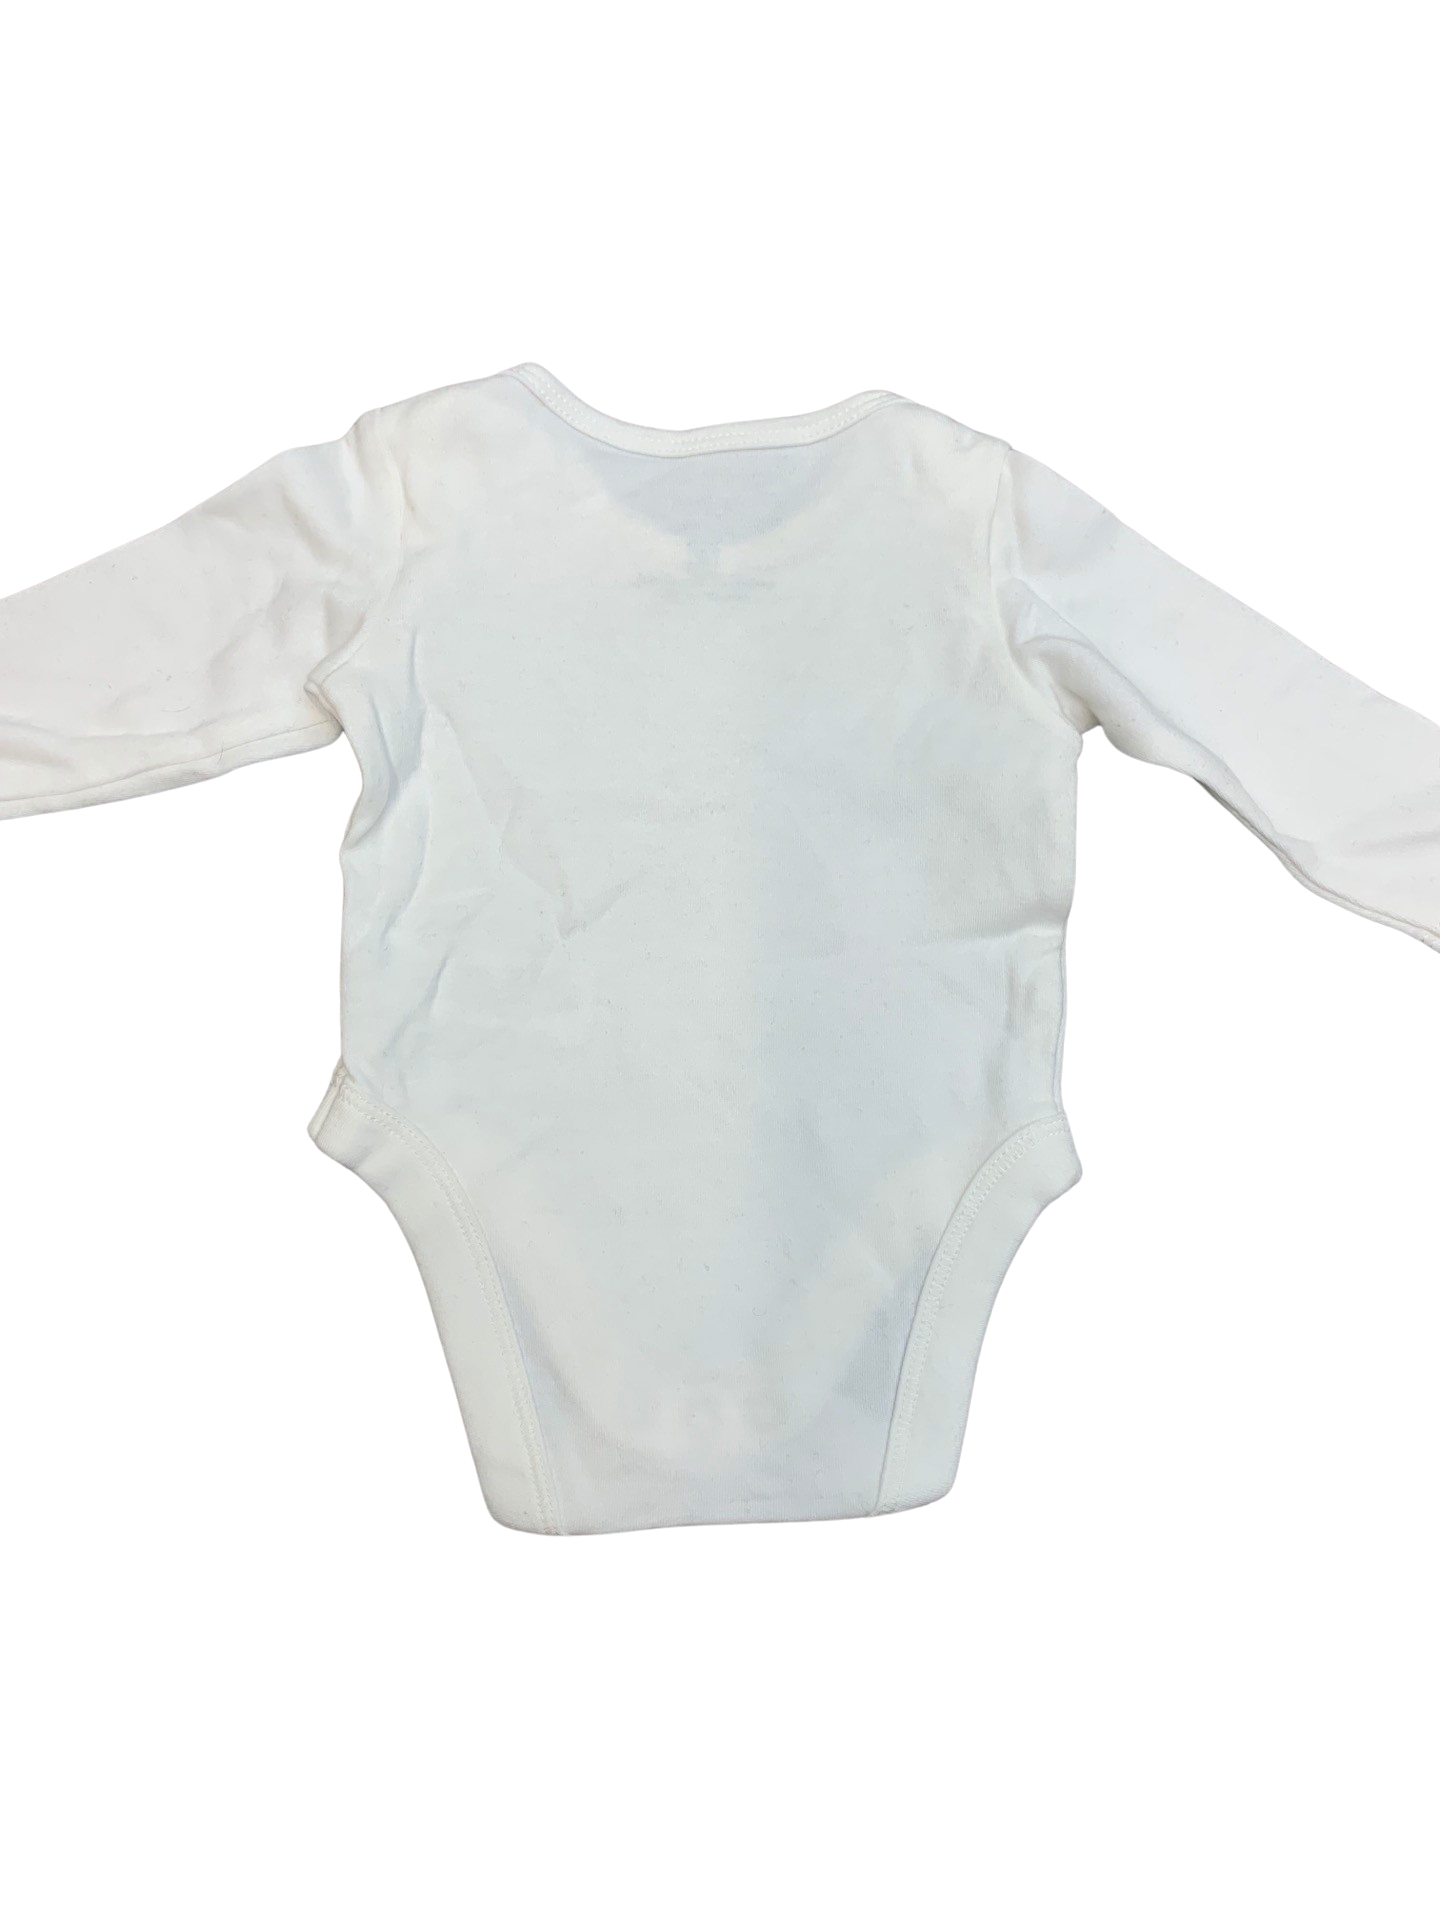 F&F 'Kind Is Cool' Long Sleeve Grow Up To 1 Month/10lbs